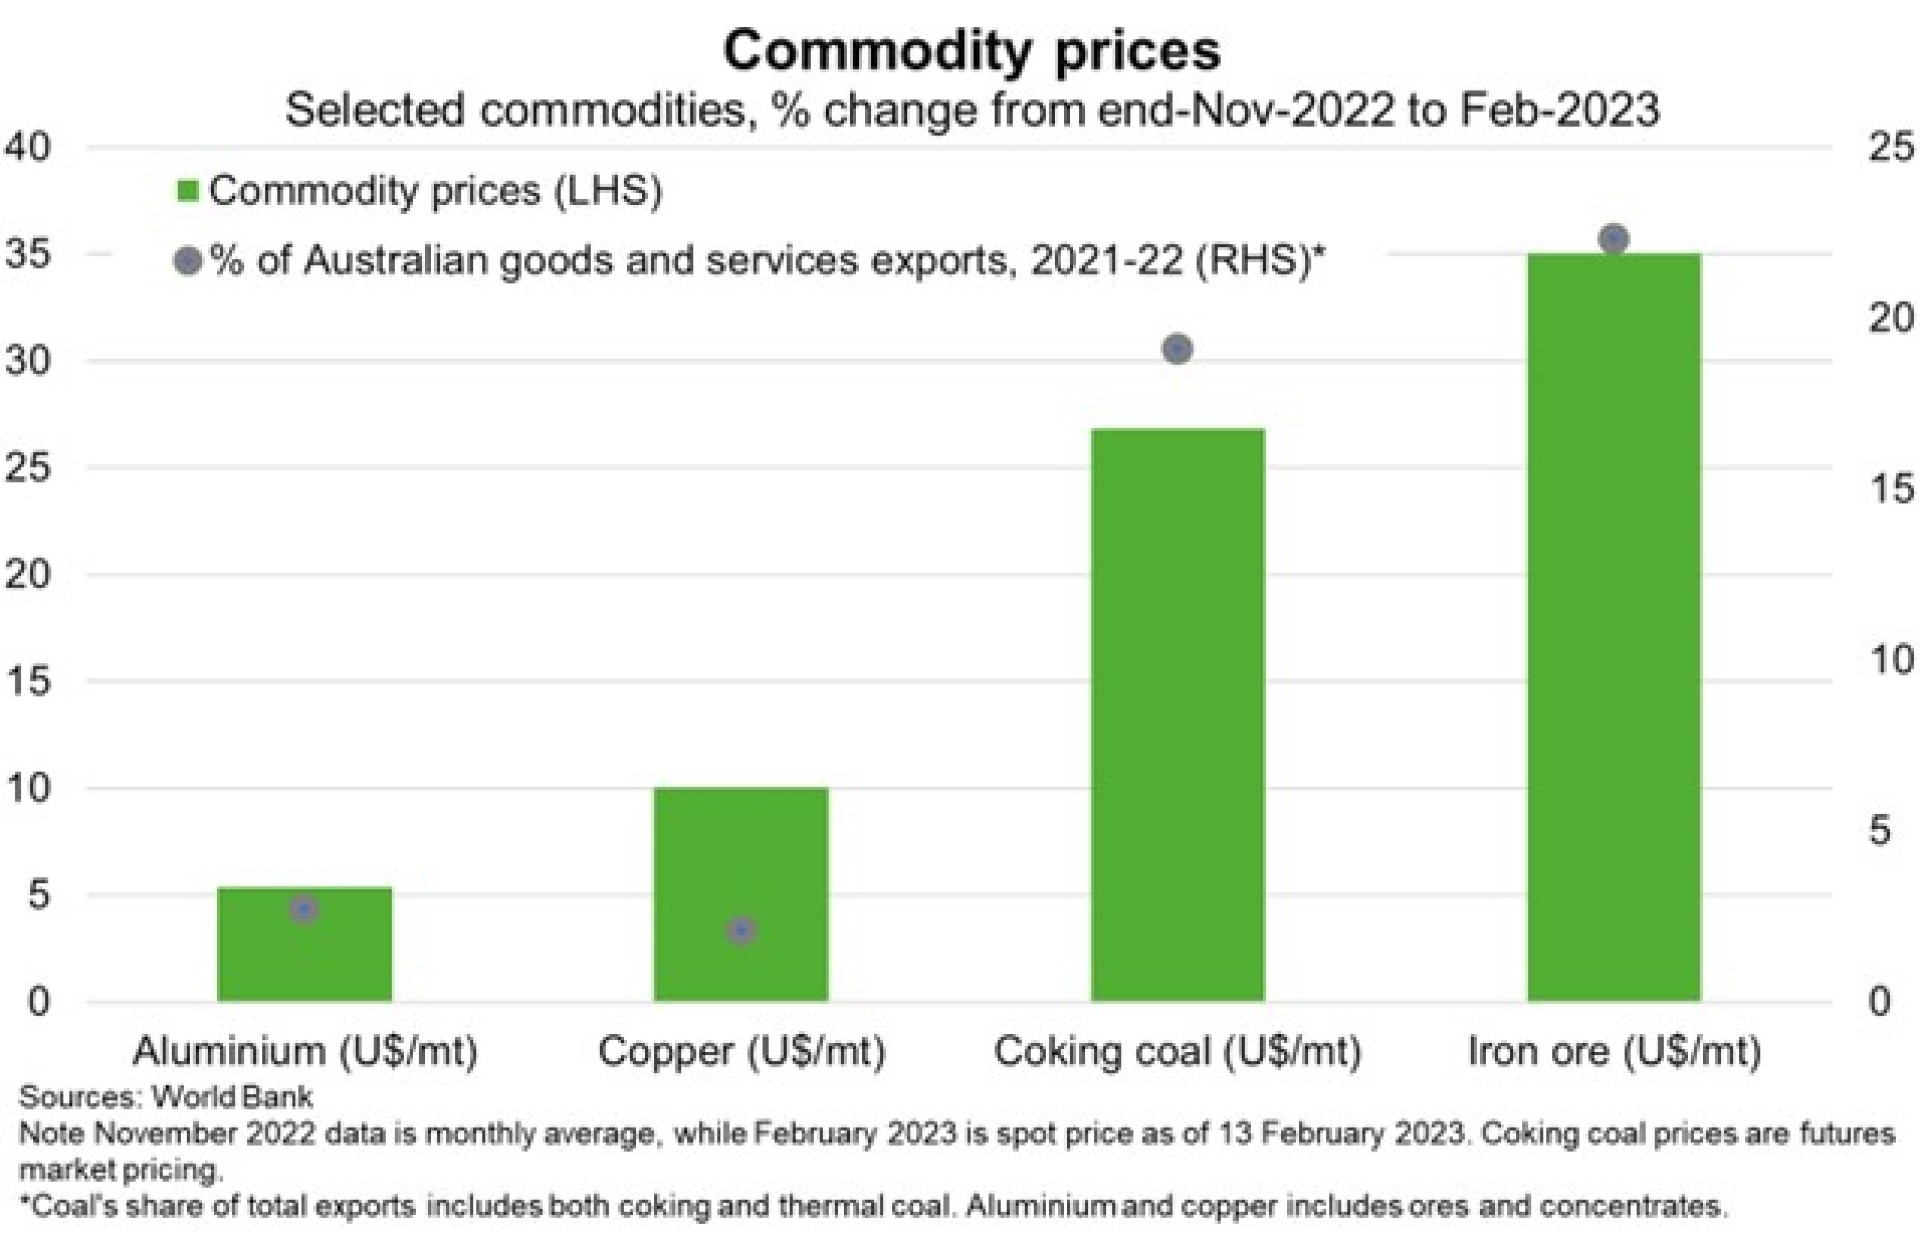 Since China began easing COVID restrictions in early December, the price of several commodities has risen.